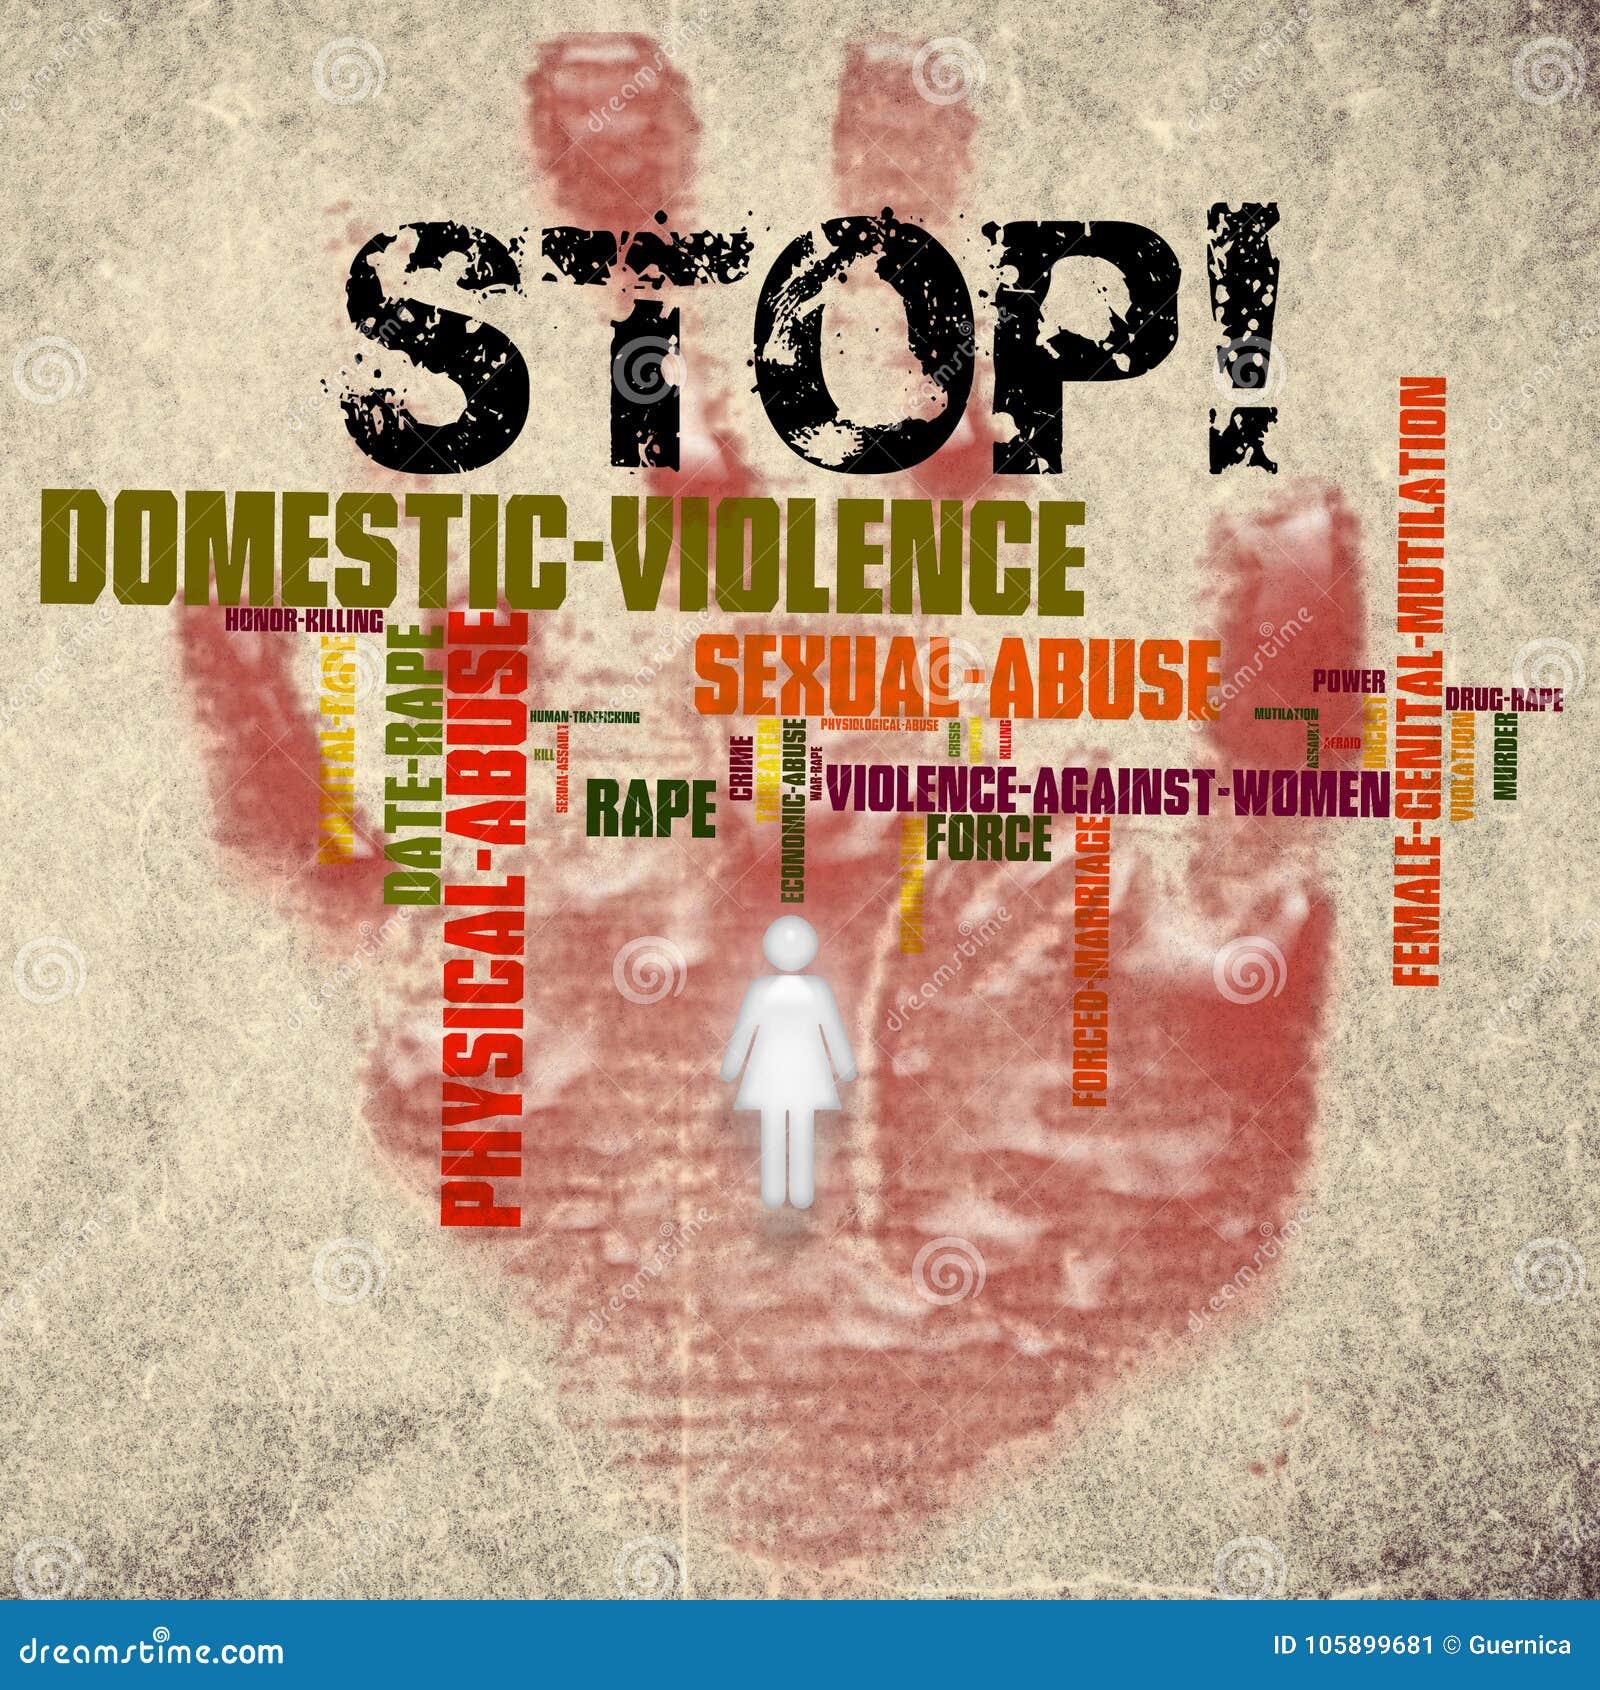 stop domestic violence against women